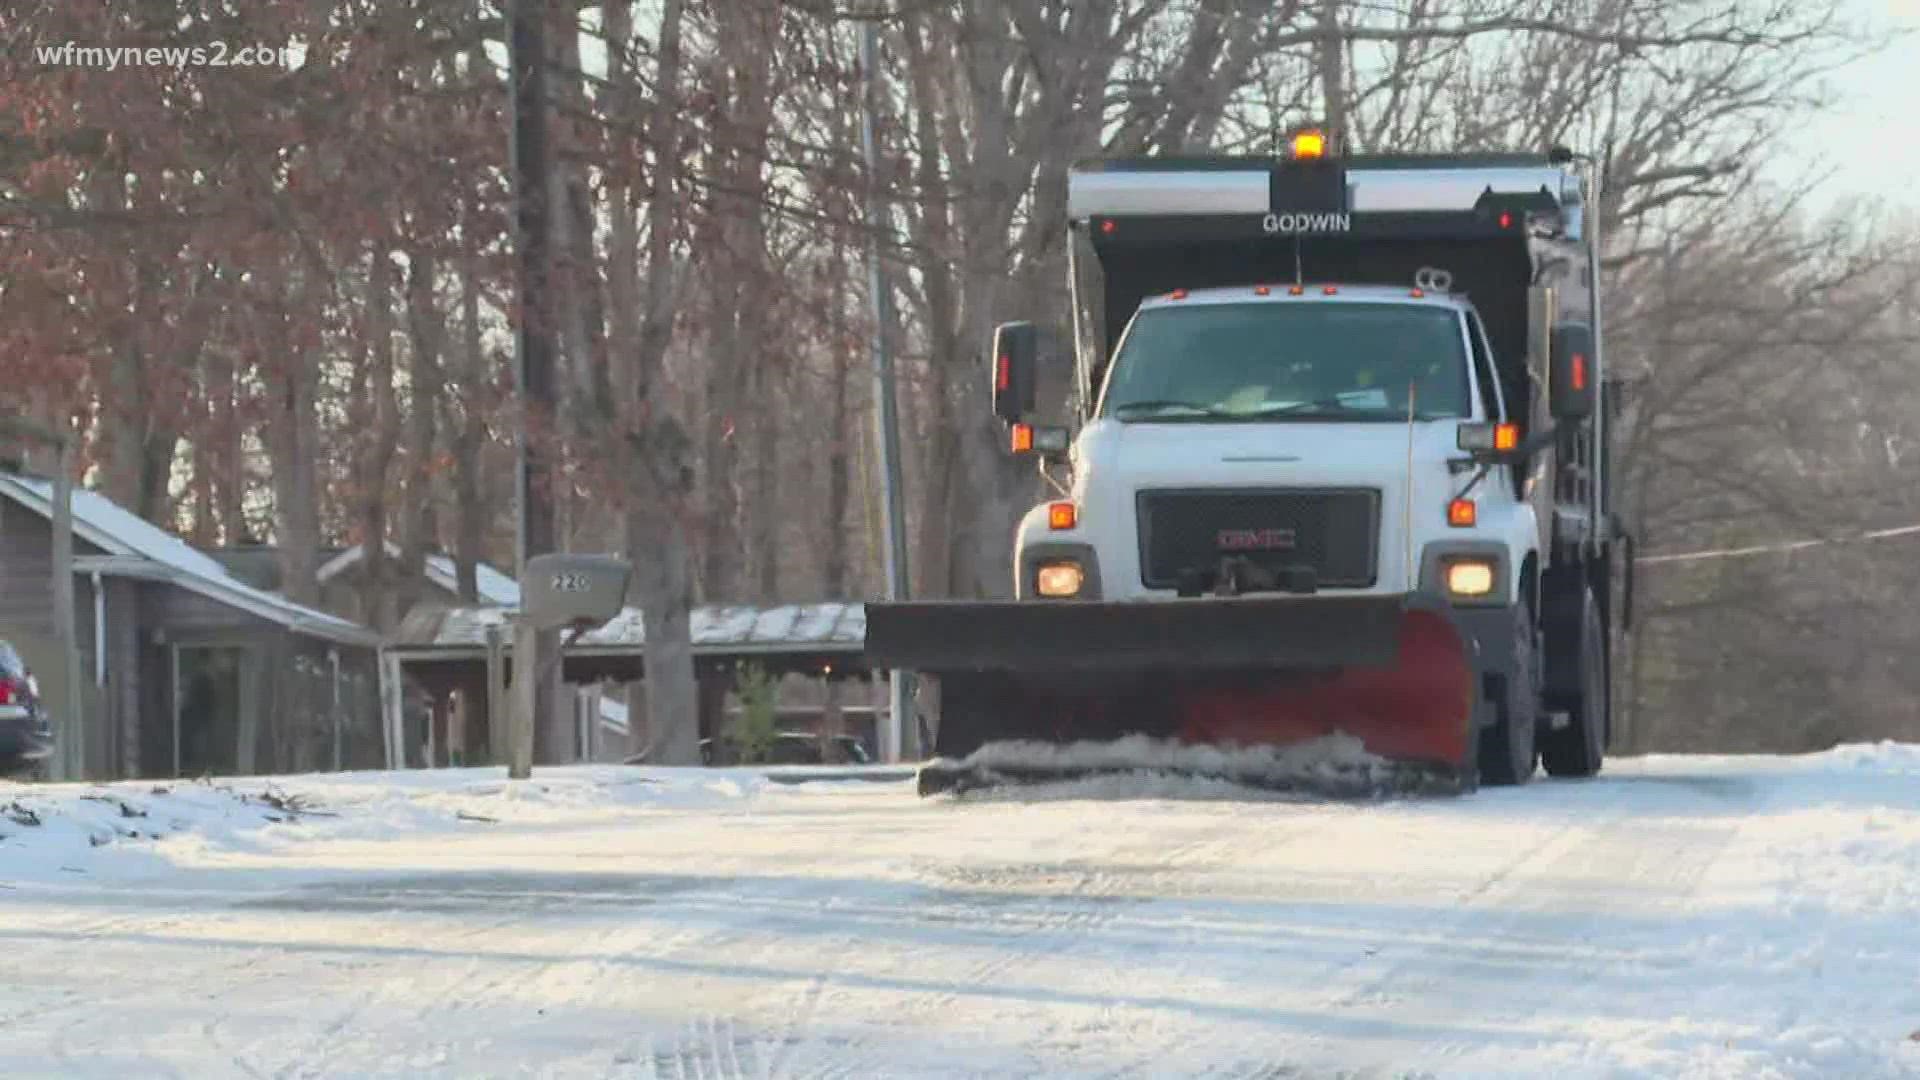 The city of Greensboro, Guilford county teams race against the clock to clear roads before the next winter storm